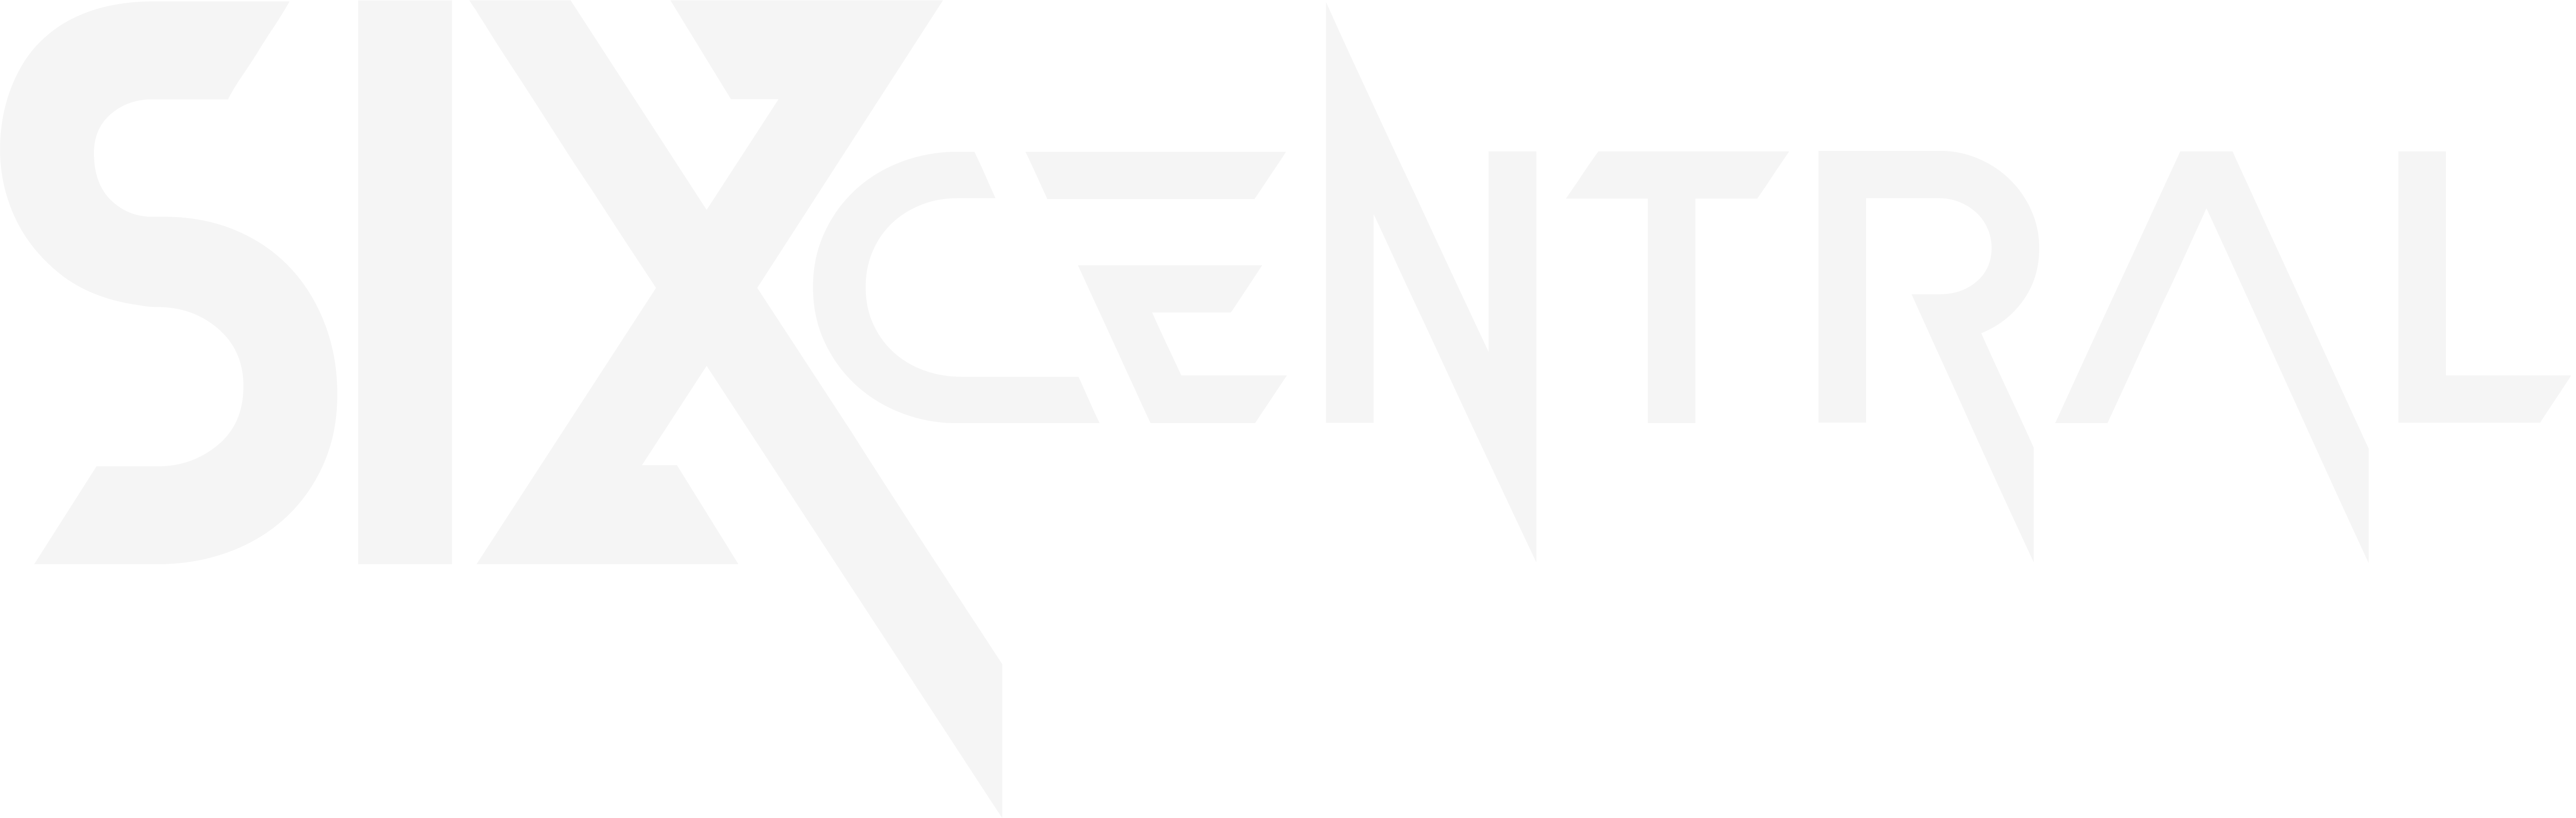 SixCentral